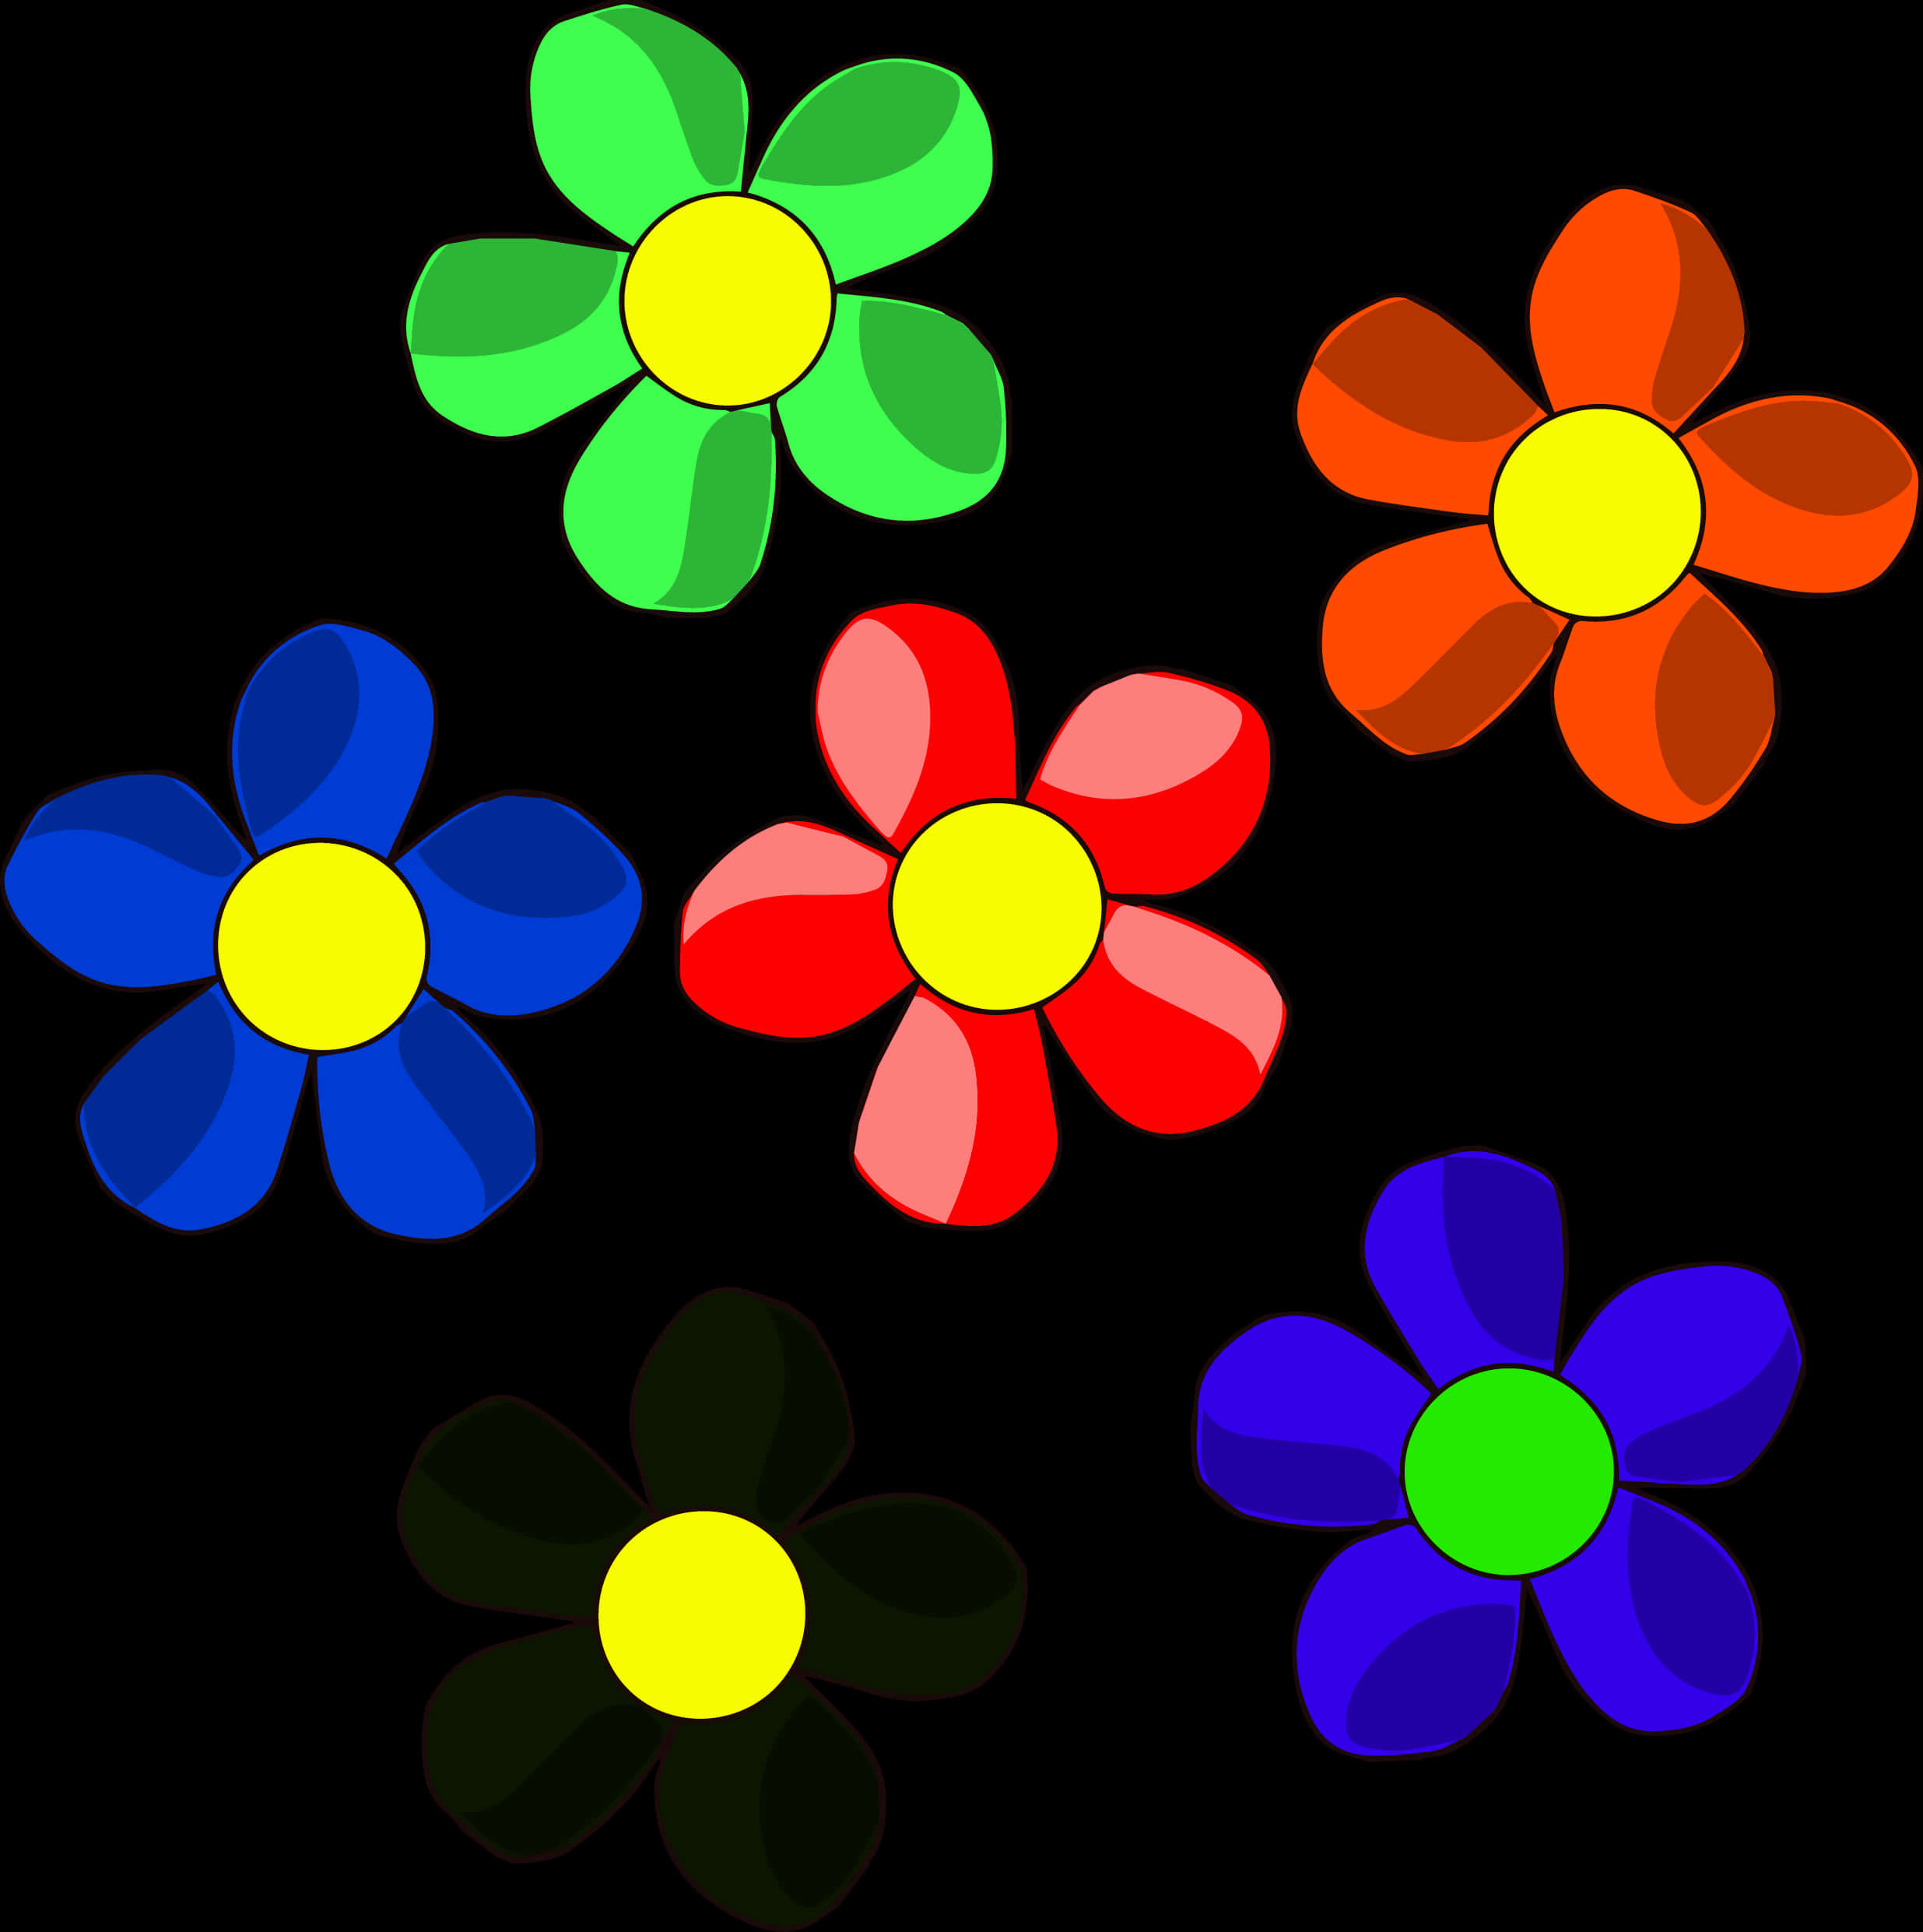 Colorful Daisy Flowers Vector Illustration PNG